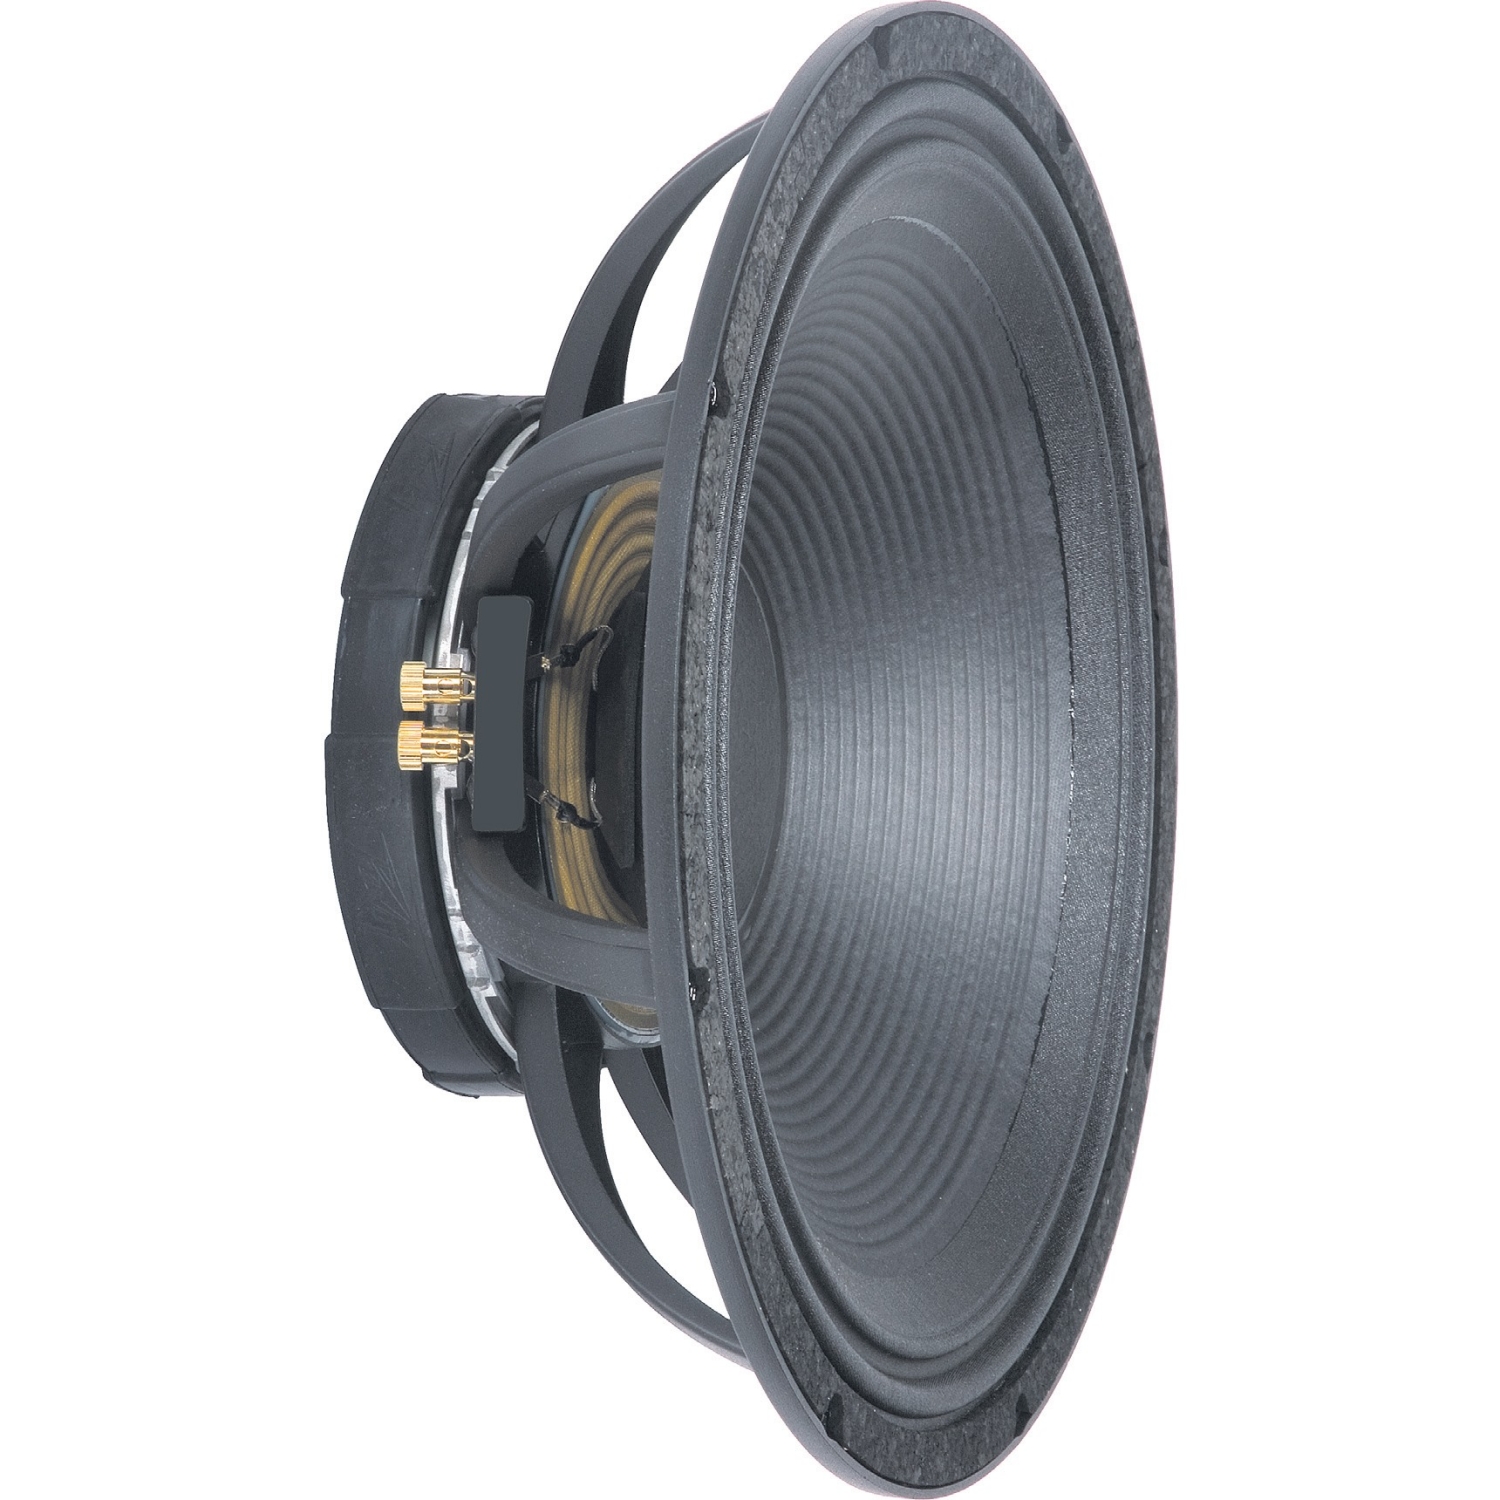 Peavey 560600 18 Inch 3200 W Low Rider Professional Performing Subwoofer Speaker - image 2 of 2